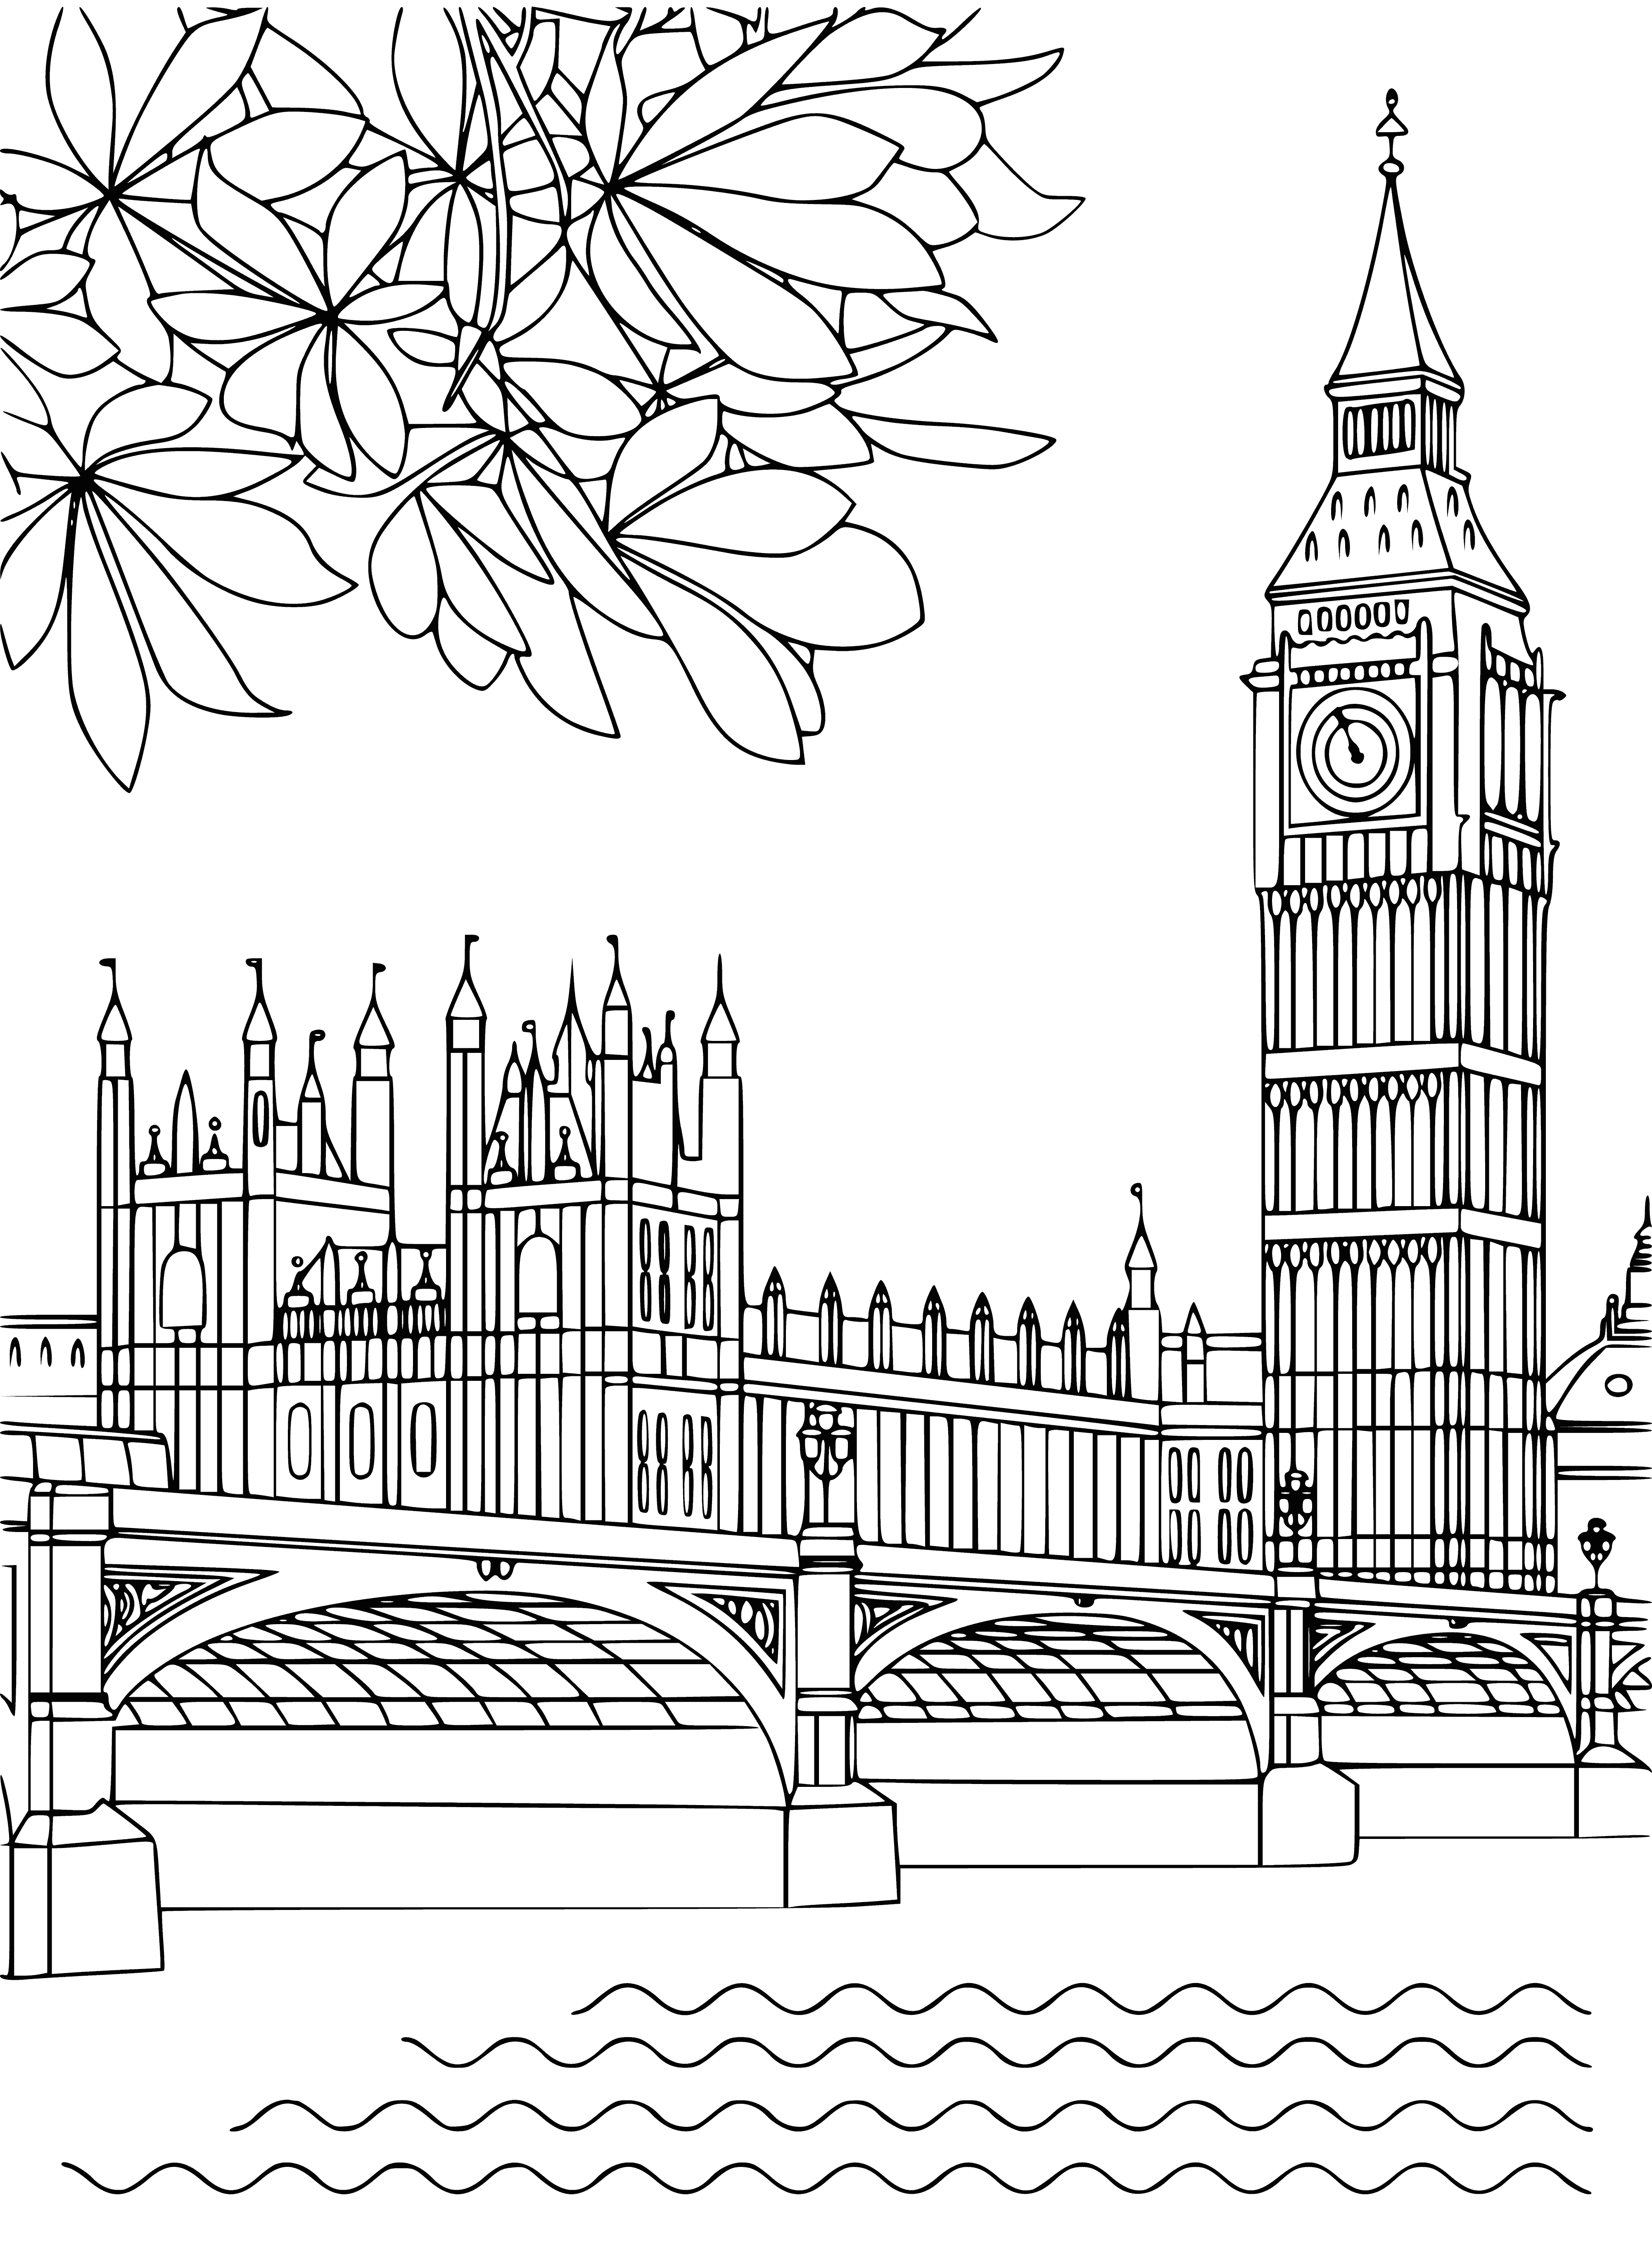 coloring page: People navigating the hustle and bustle of modern busy city life, surrounded by tall buildings and busy streets. #citylife